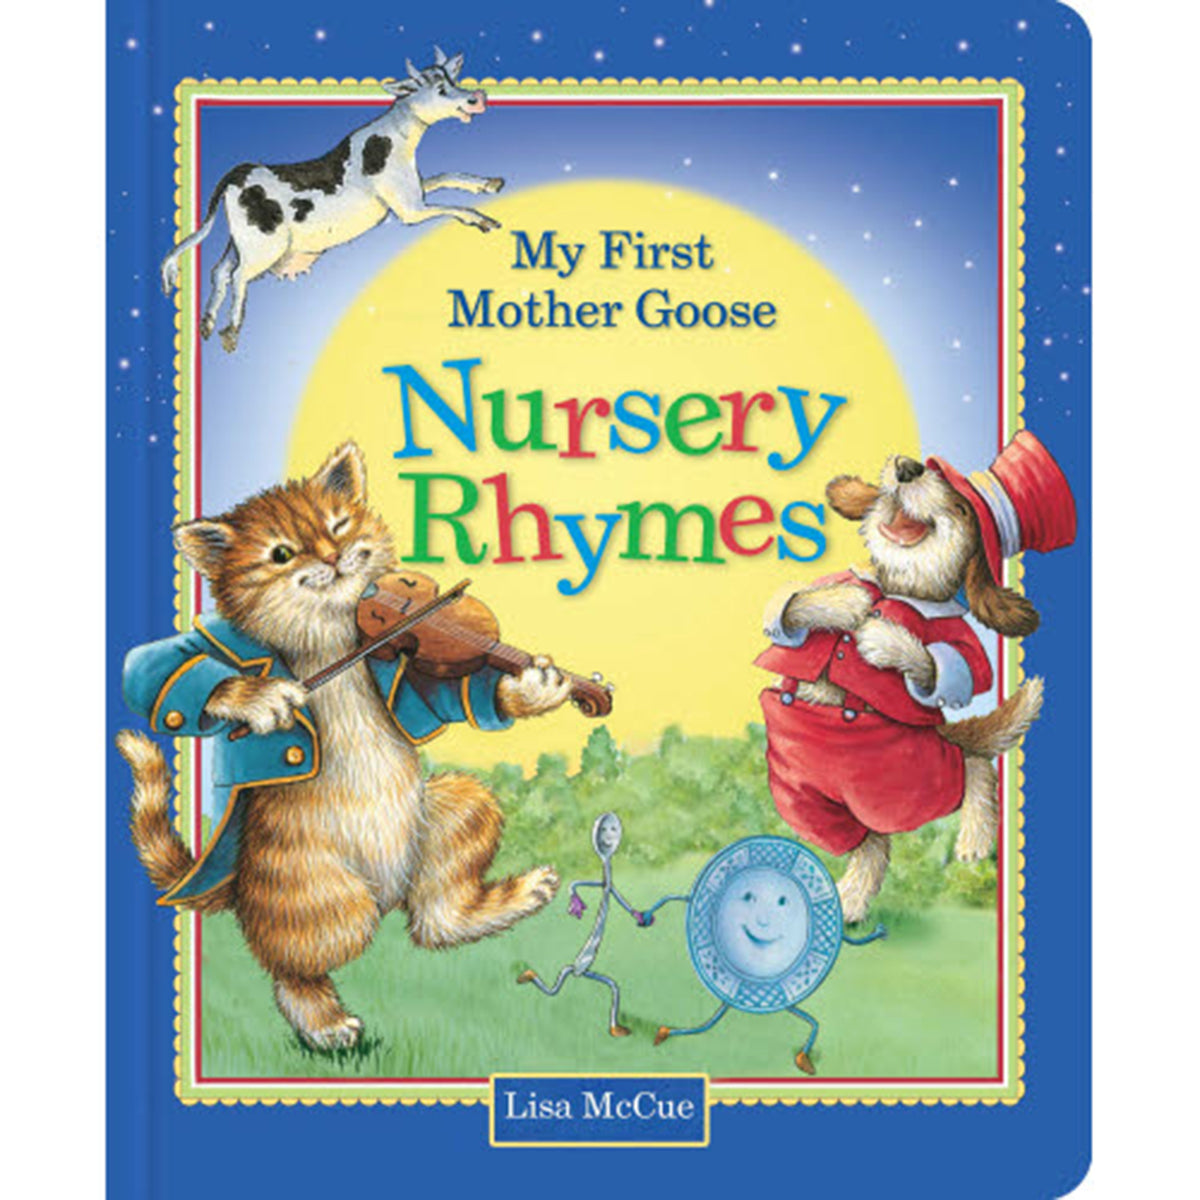 My First Mother Goose Nursery Rhymes Board Book